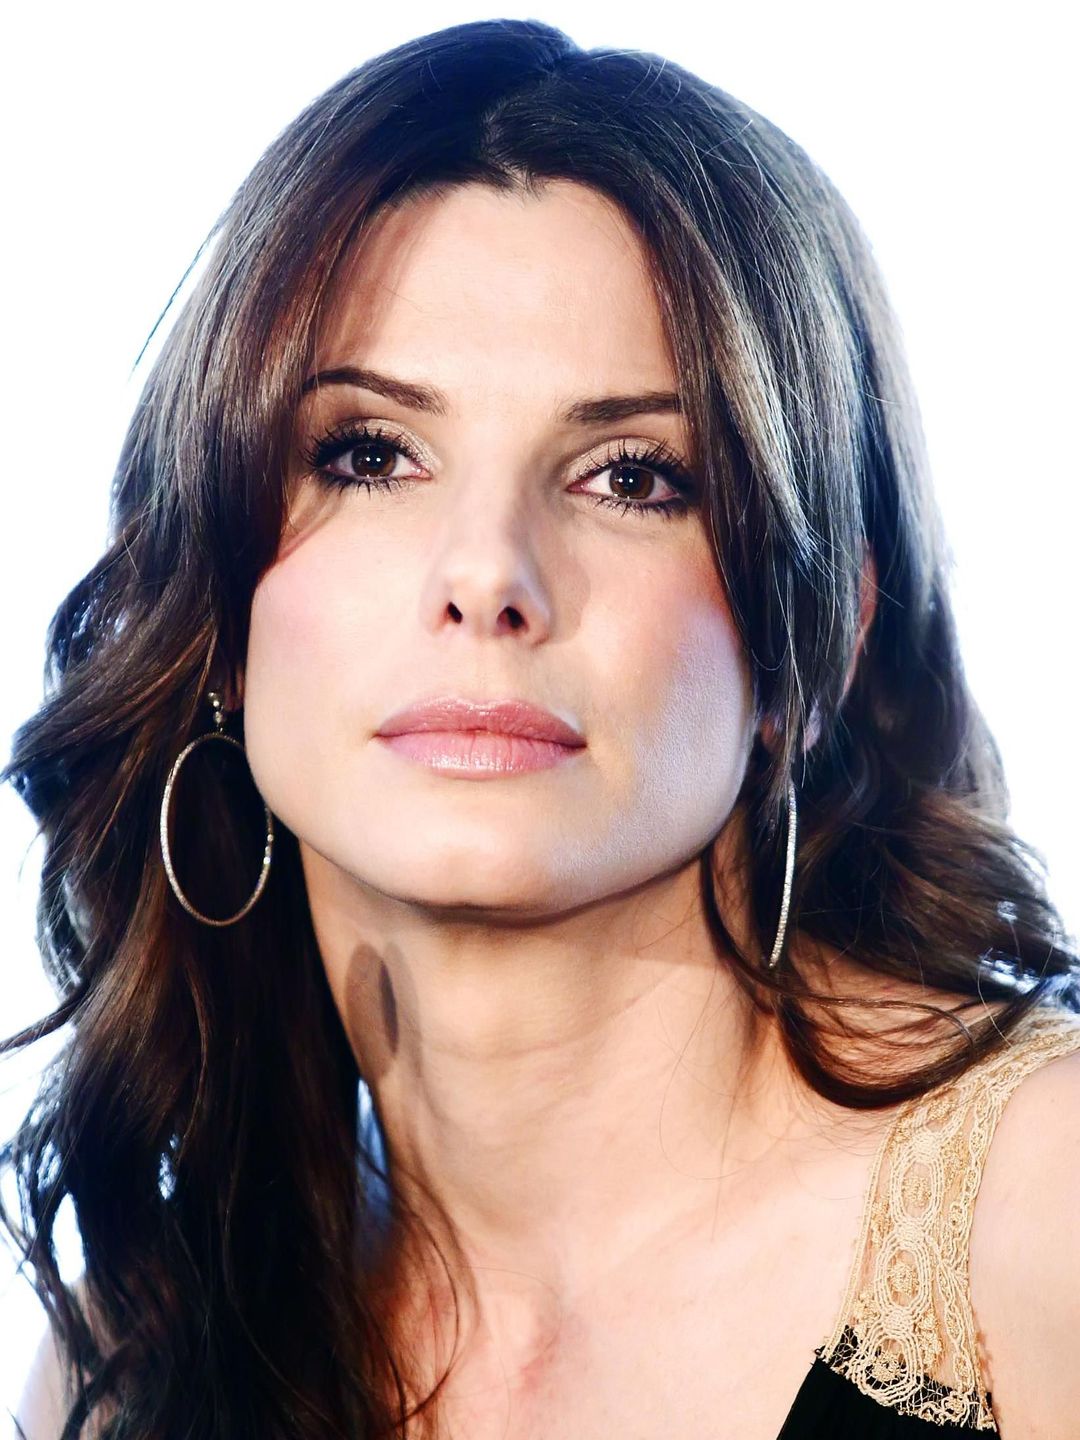 Sandra Bullock who is her father